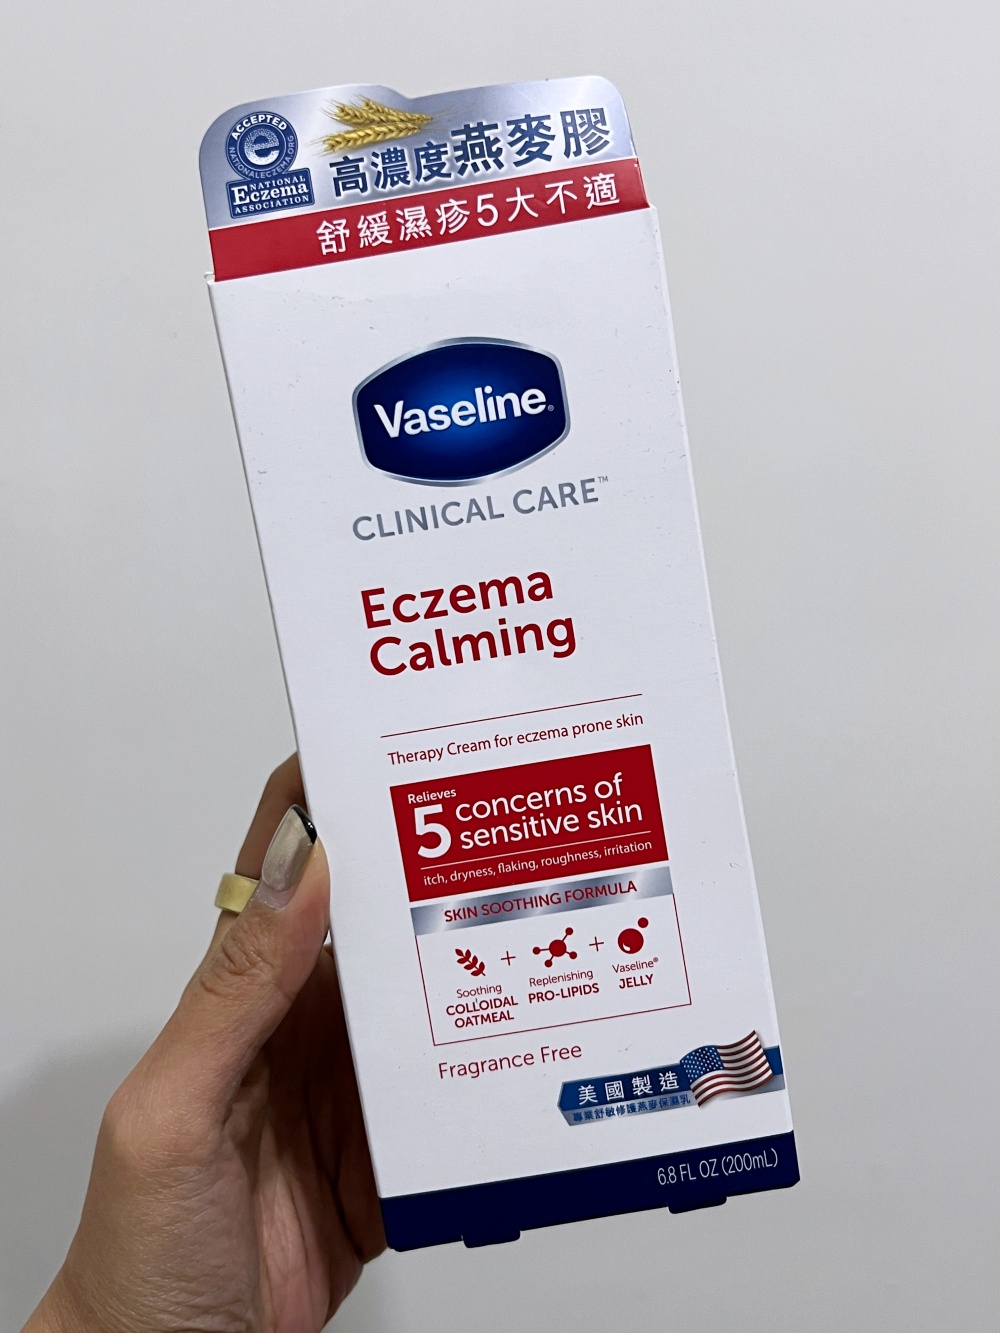 Vaseline Clinical Care Eczema Calming Therapy Cream